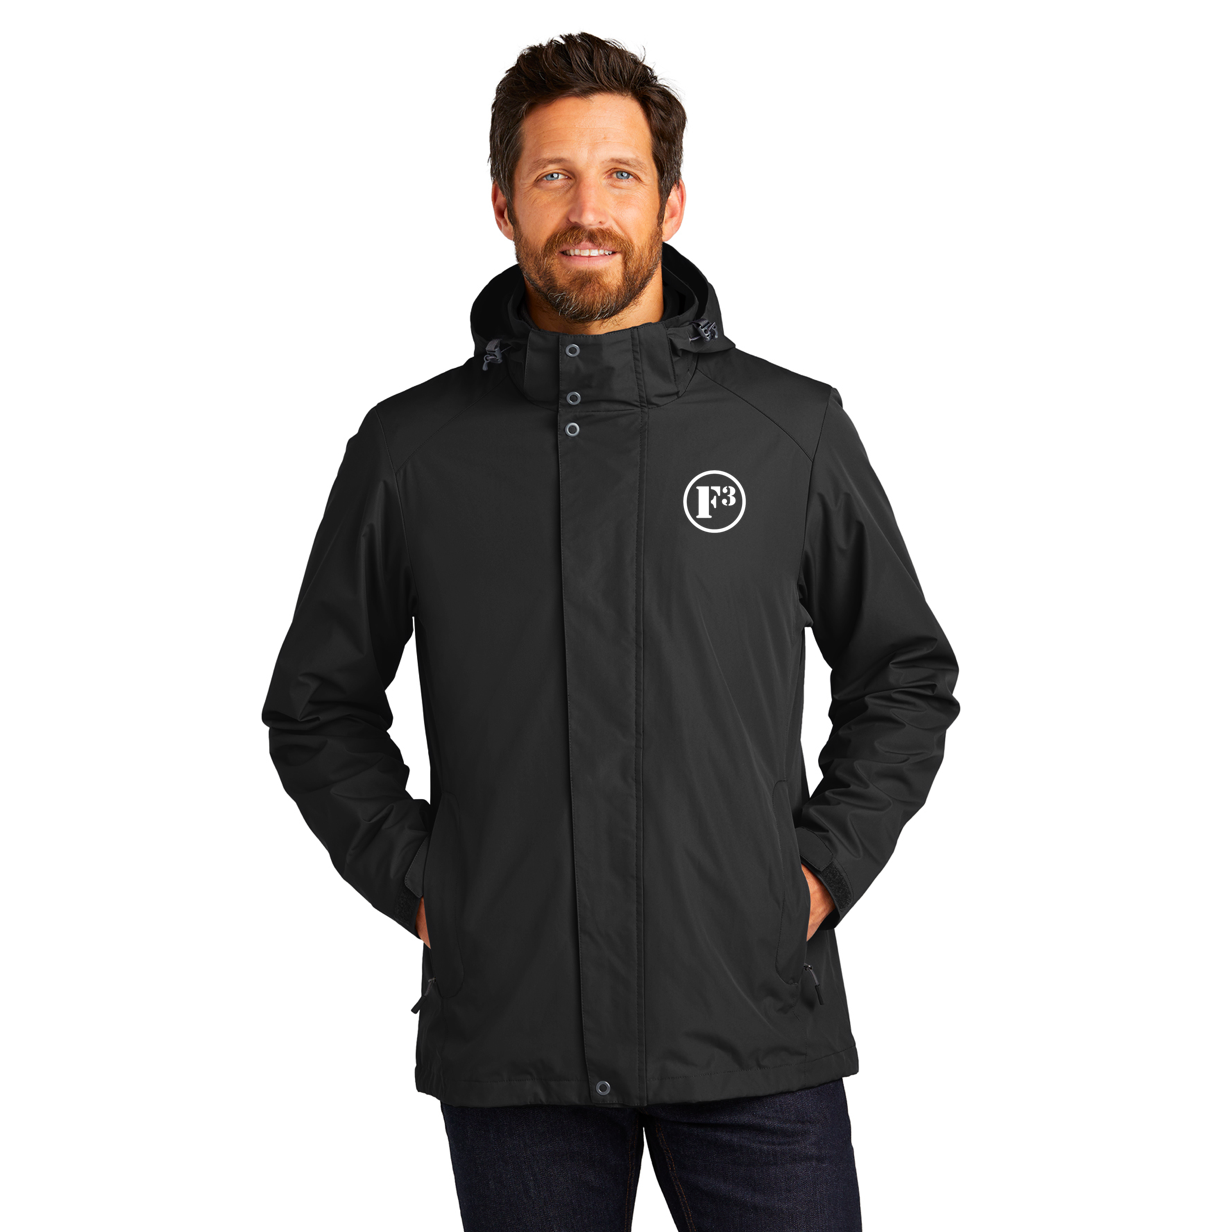 F3 Port Authority All-Weather 3-in-1 Jacket - Made to Order